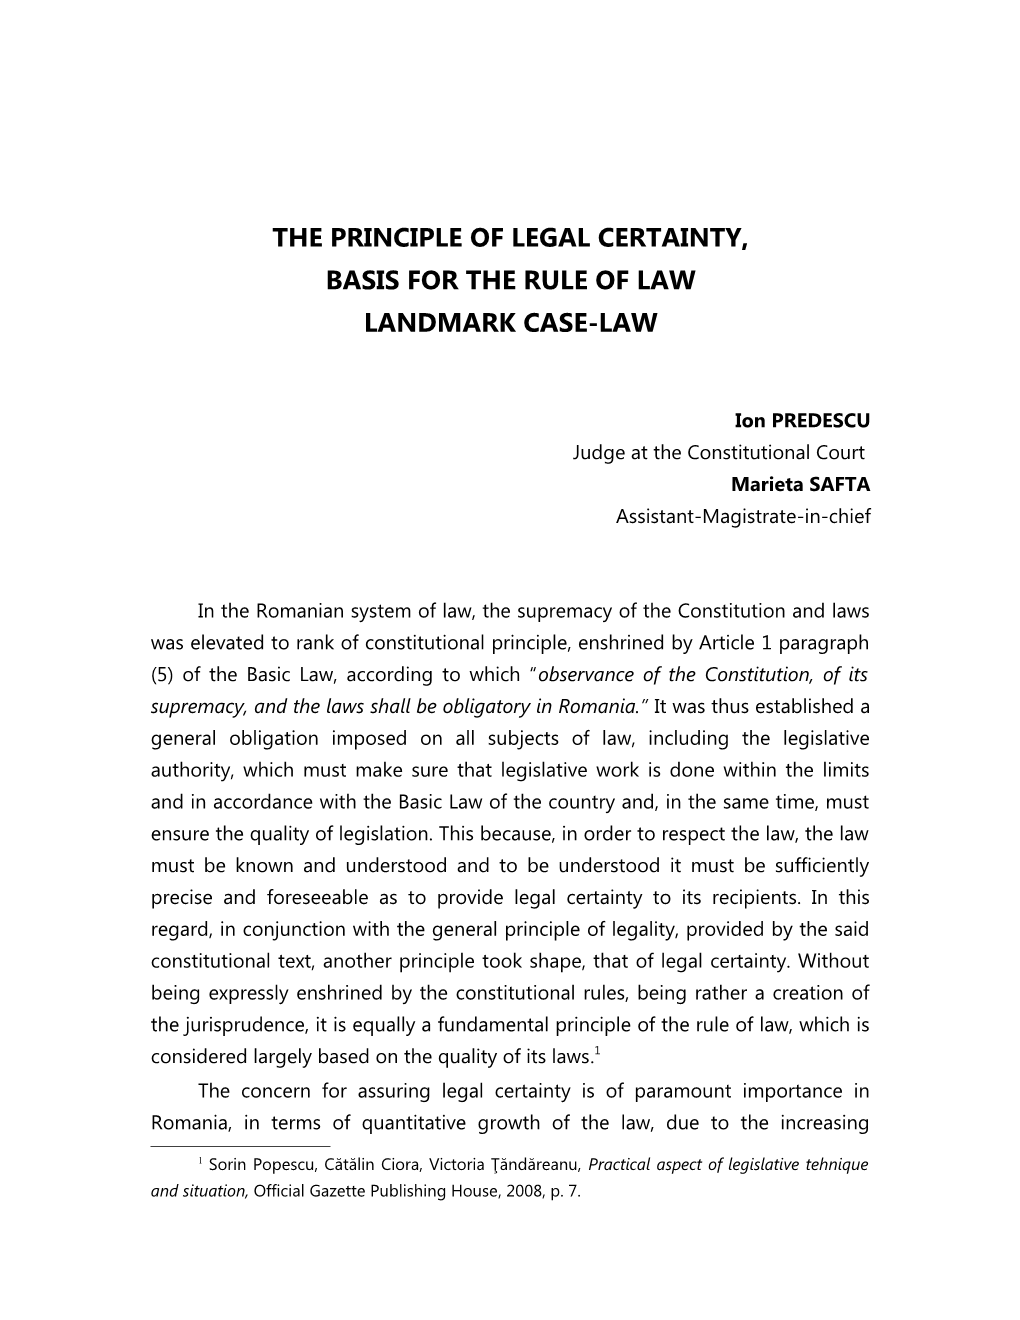 The Principle of Legal Certainty, Basis for the Rule of Law Landmark Caselaw